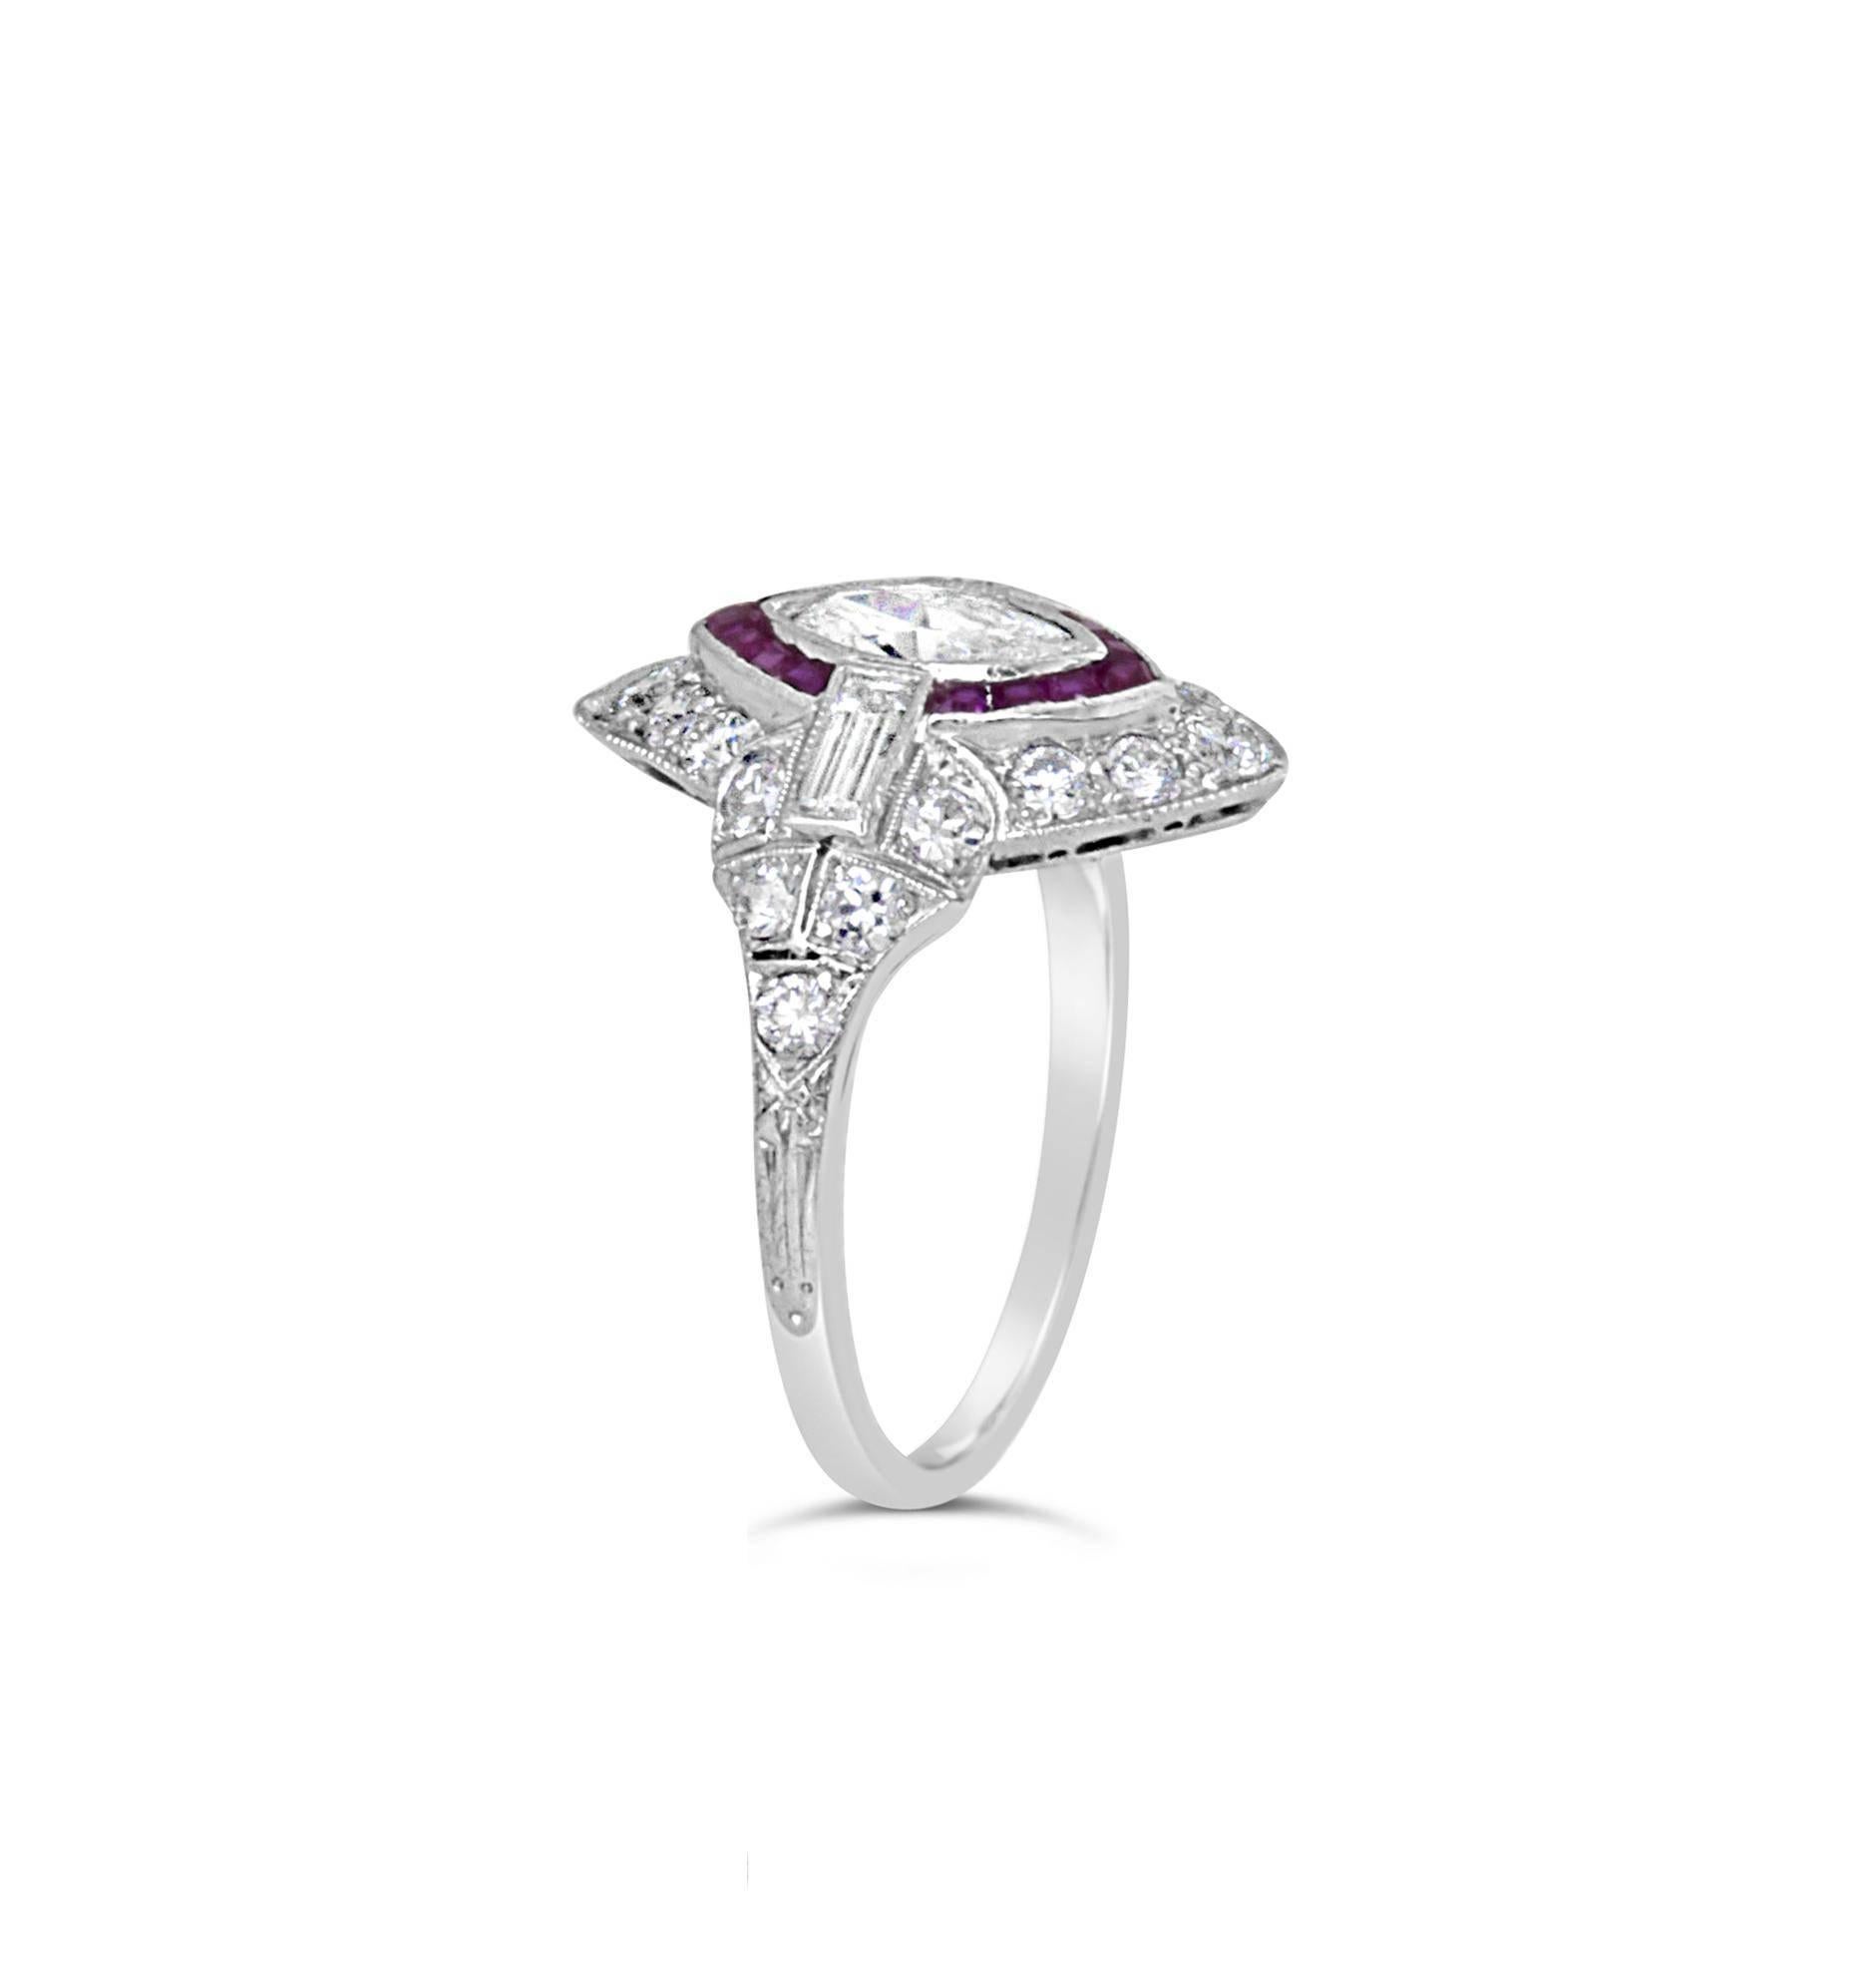 Gorgeous art deco platinum ring featuring an oval cut diamond of 0.42ct G VS1 surrounded by 14 French cut rubies, 2 baguette cut diamonds of 0.24ct each G VS, 14 round brilliant cut diamonds forming the marquise shape of approx 0.48ct G VS and 6